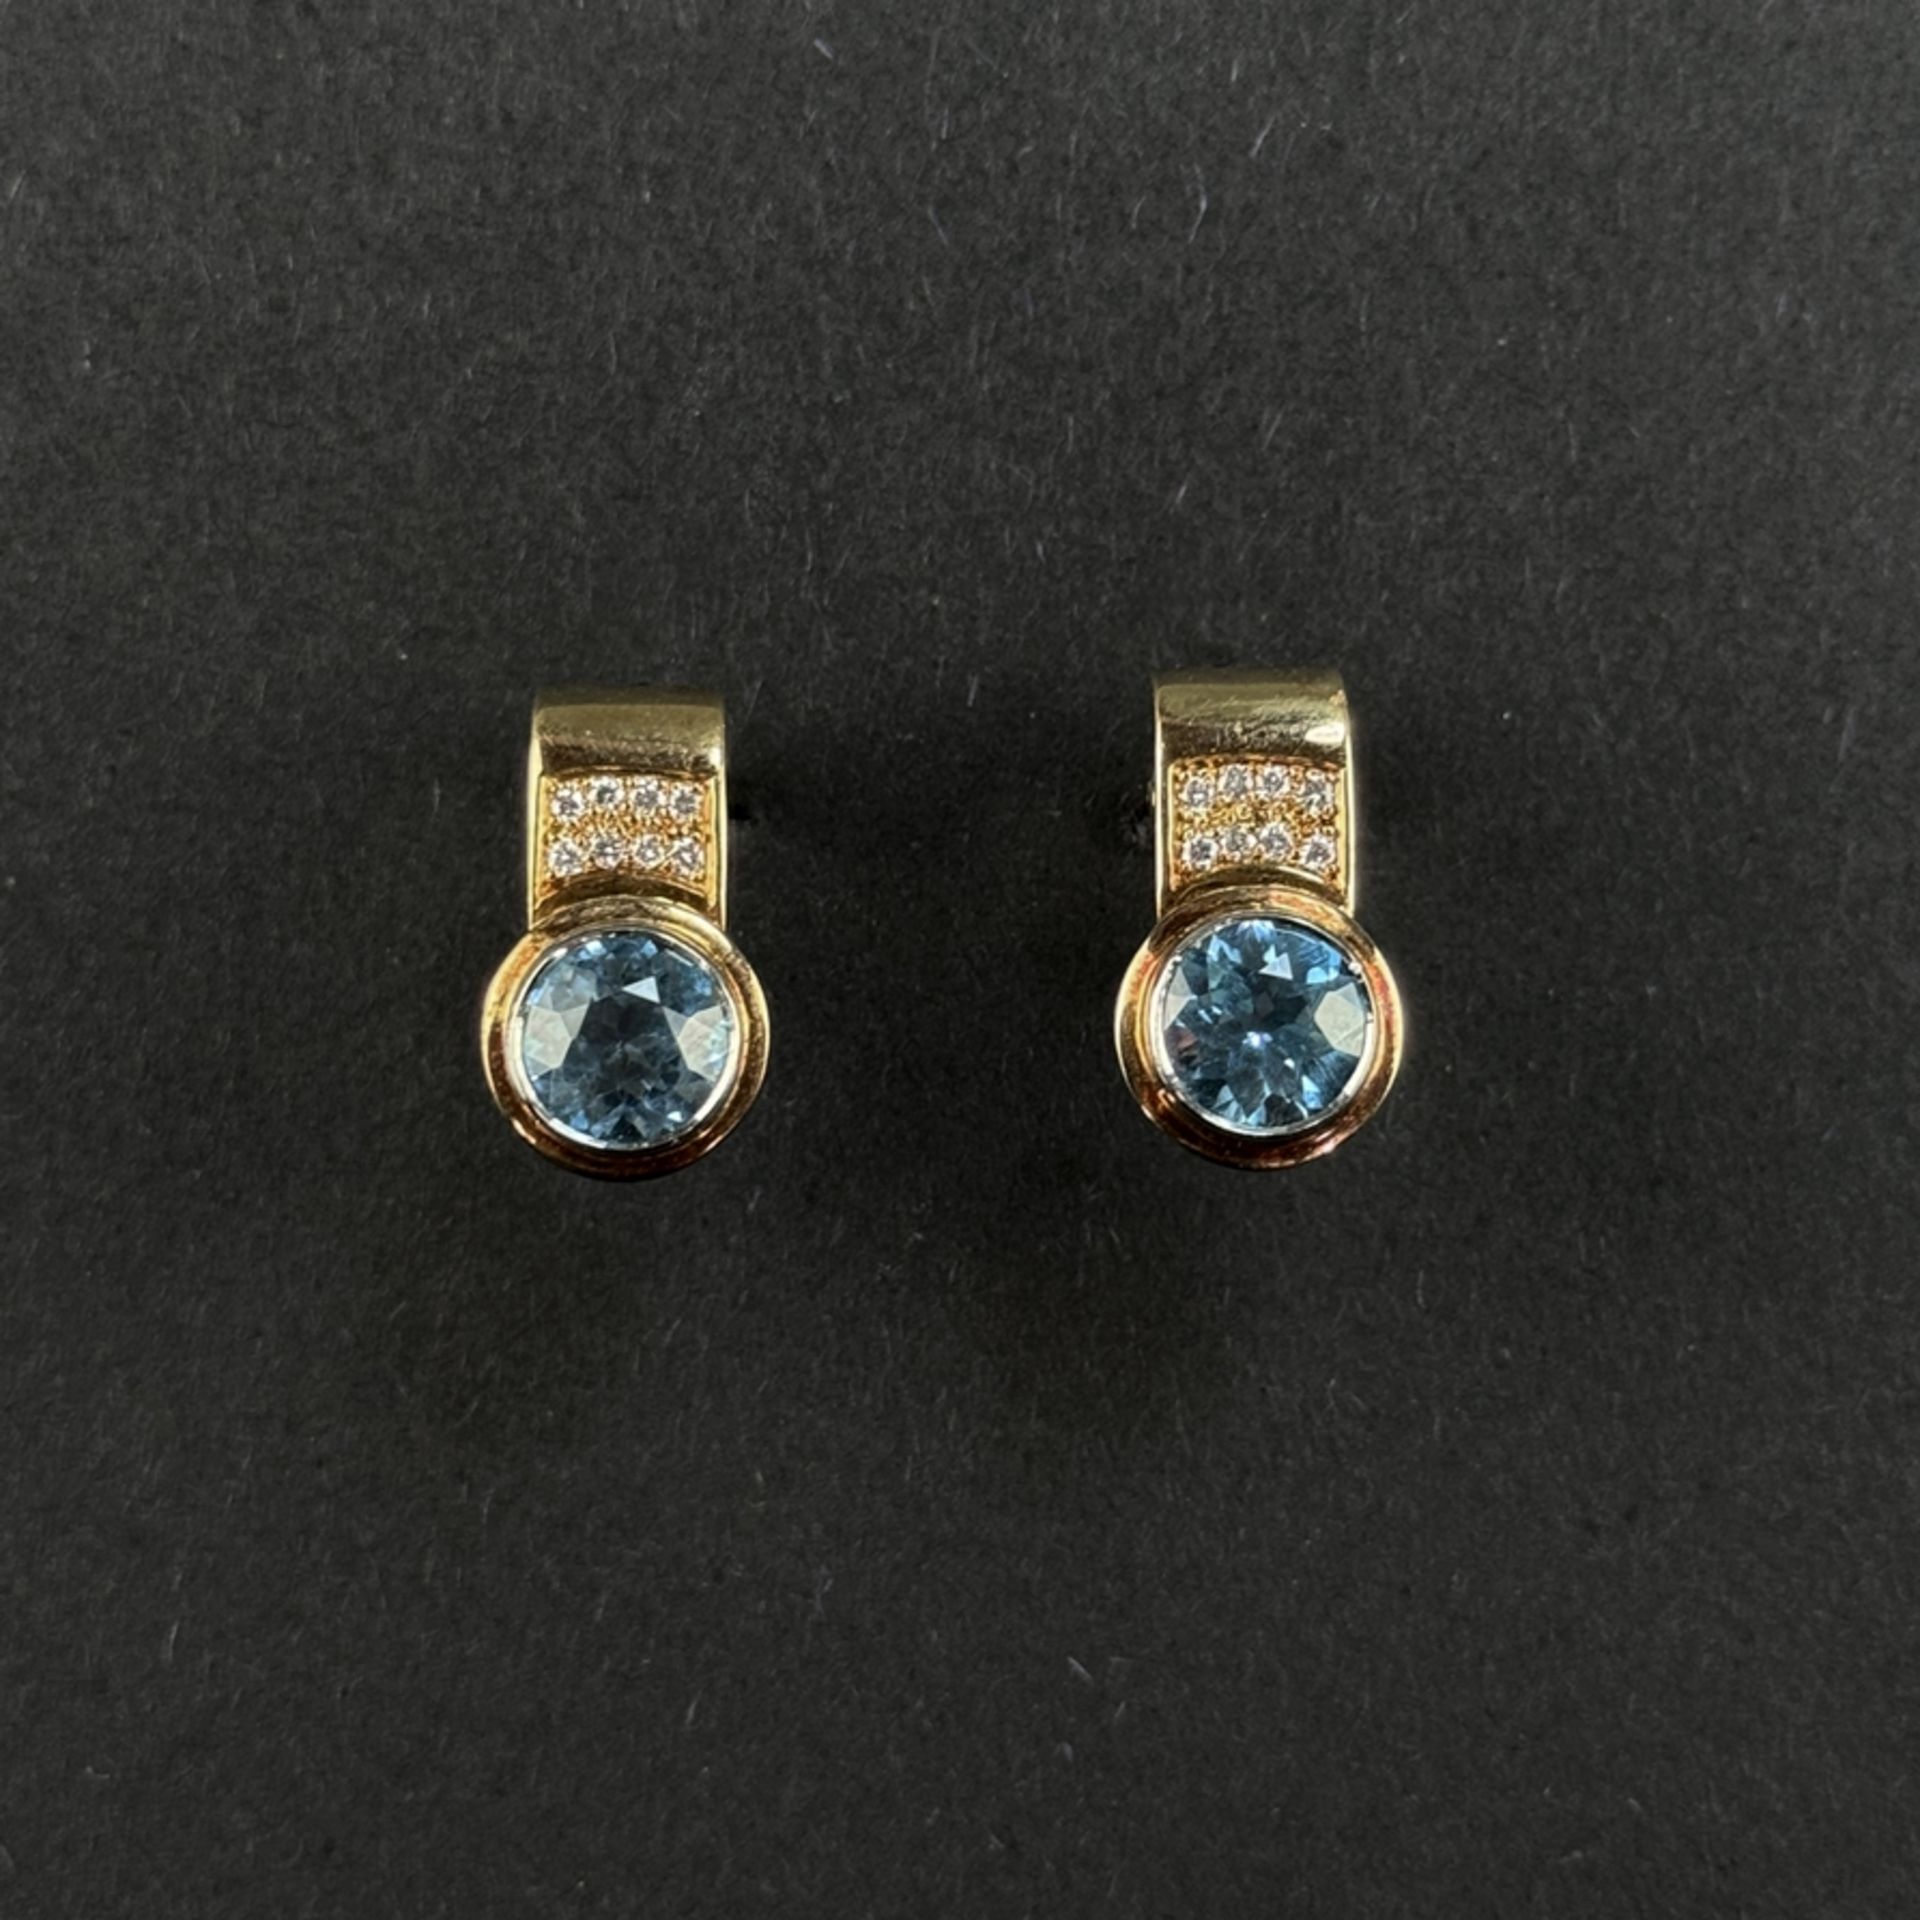 Pair of aquamarine stud earrings, 750/18K yellow gold (hallmarked and tested), 9.09g, each with rou